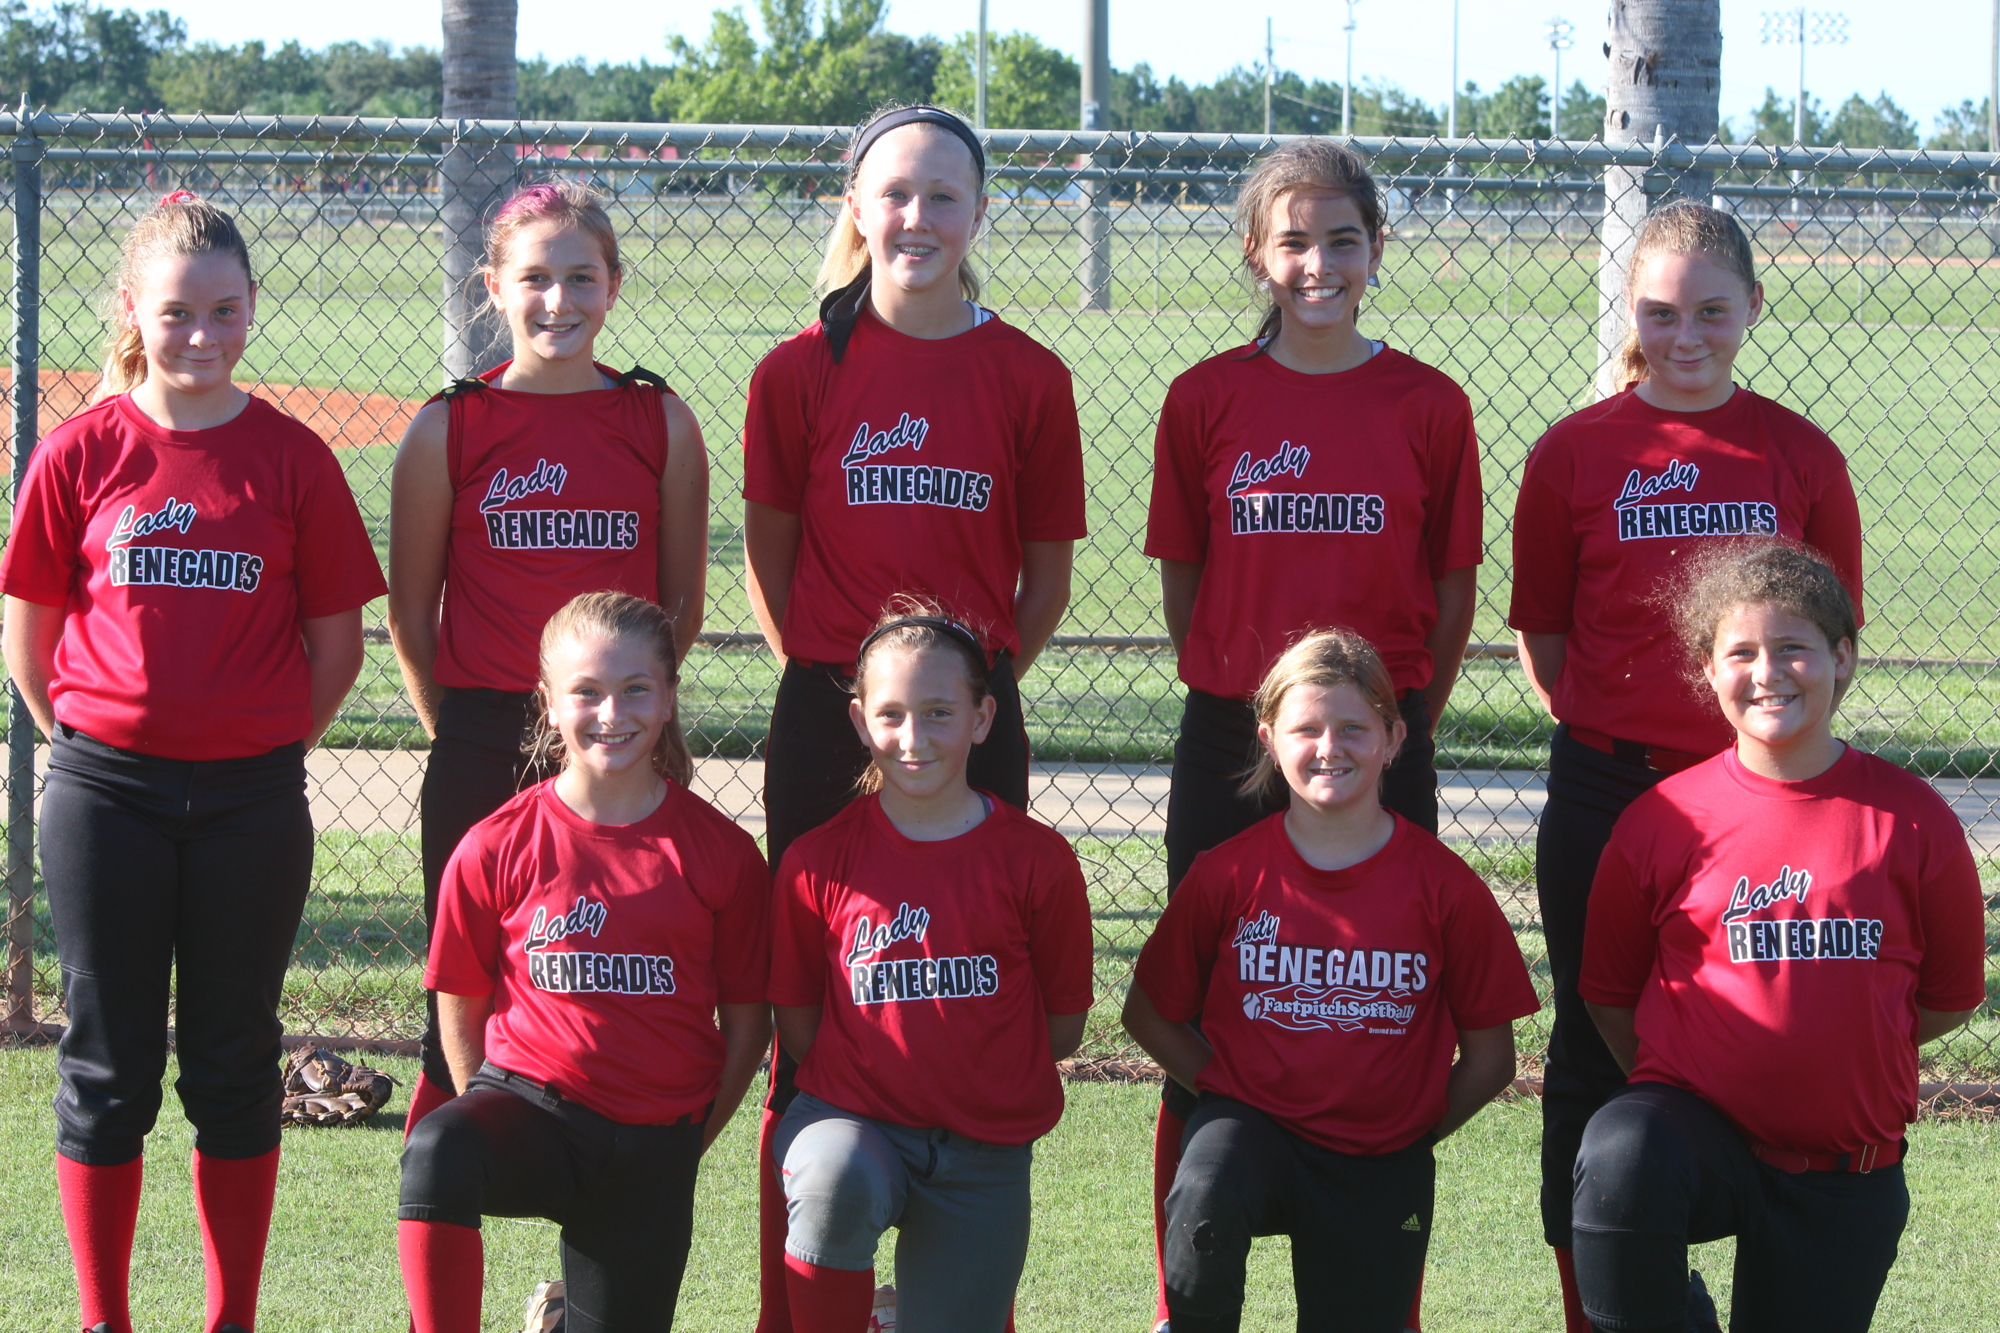 The 12U Ormond Beach Lady Renegades pose for a photo on Thursday, July 6 at practice at the Ormond Beach Sports Complex.